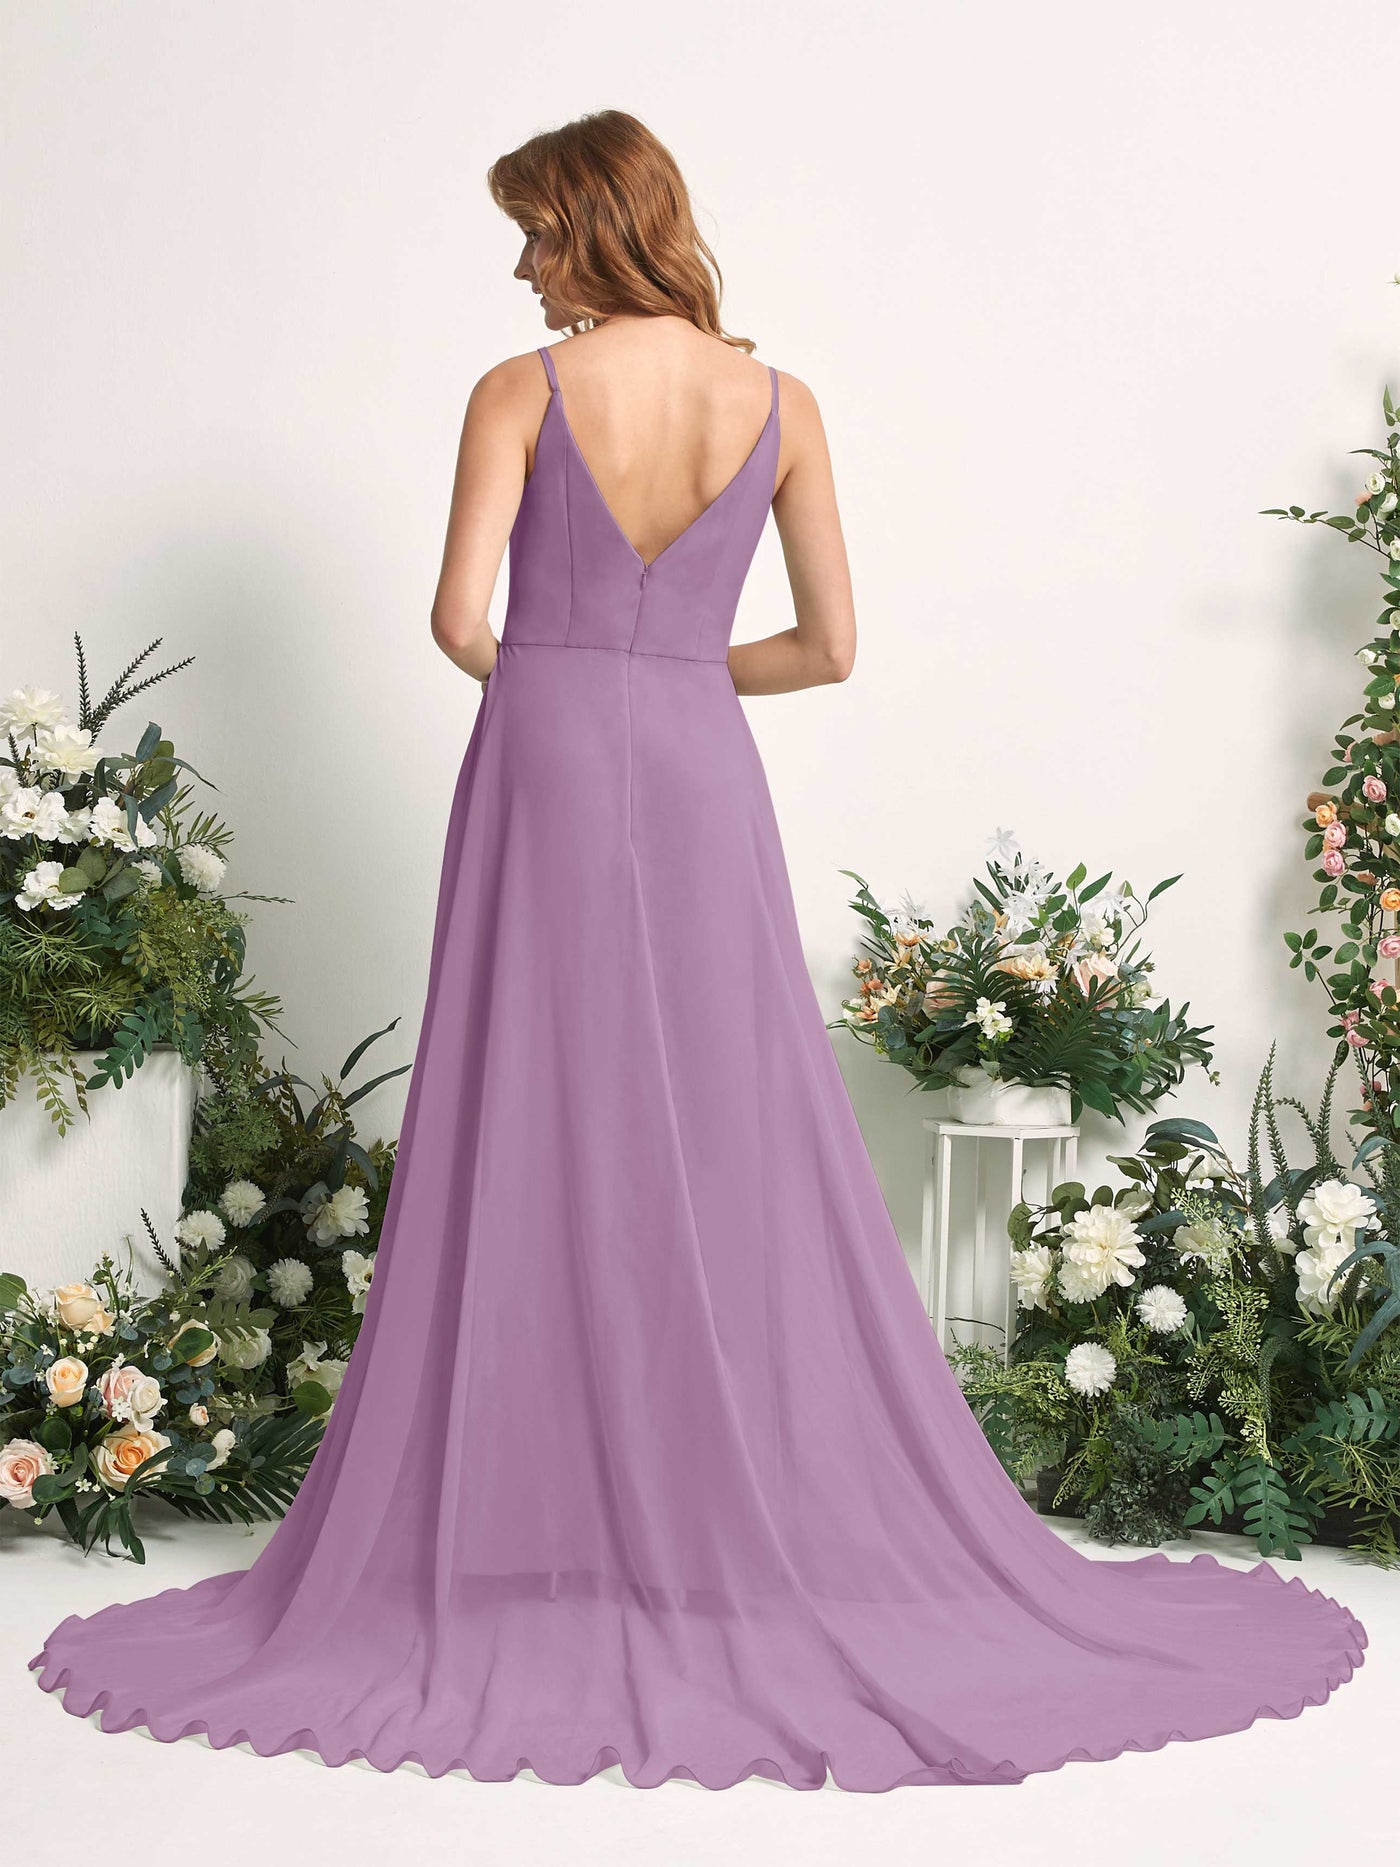 Bridesmaid Dress A-line Chiffon Spaghetti-straps Full Length Sleeveless Wedding Party Dress - Orchid Mist (81227721)#color_orchid-mist